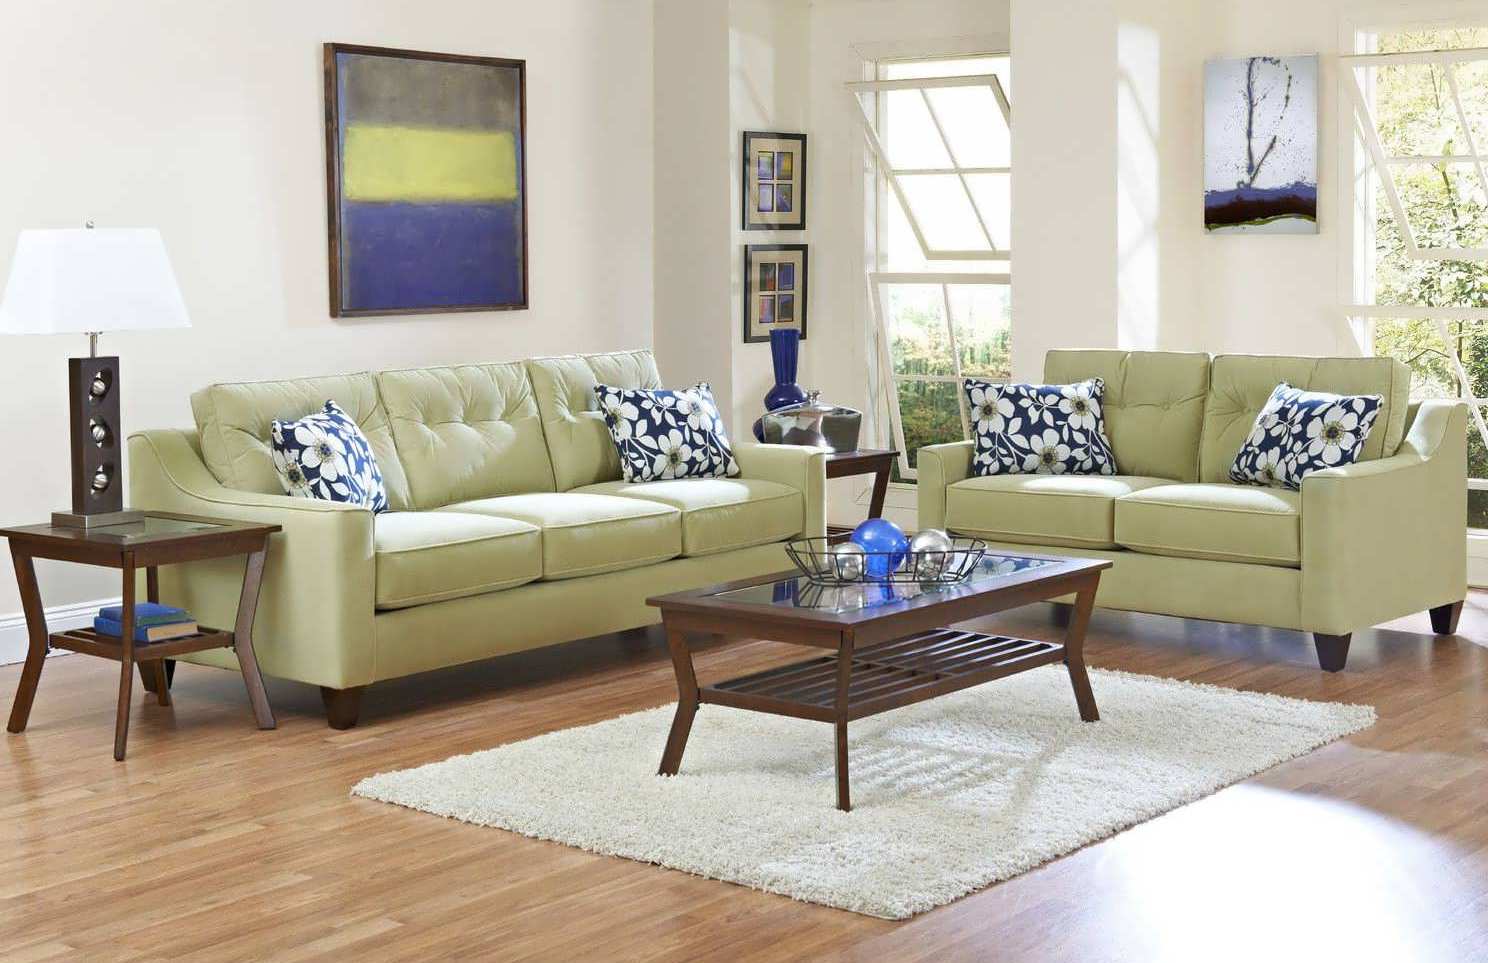 show me furniture for living room